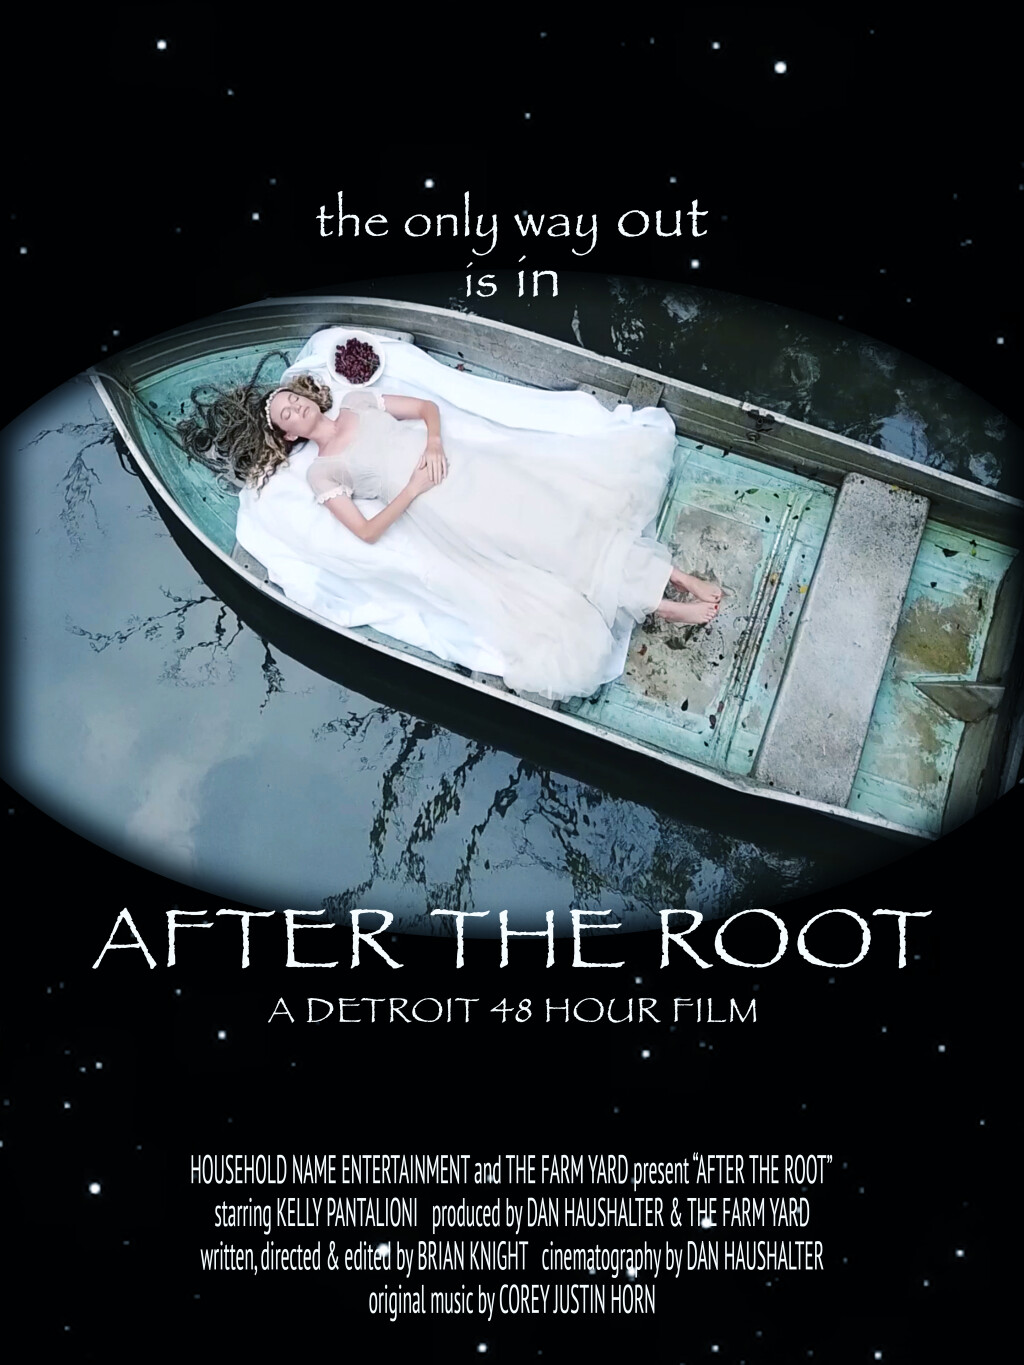 Filmposter for After the Root